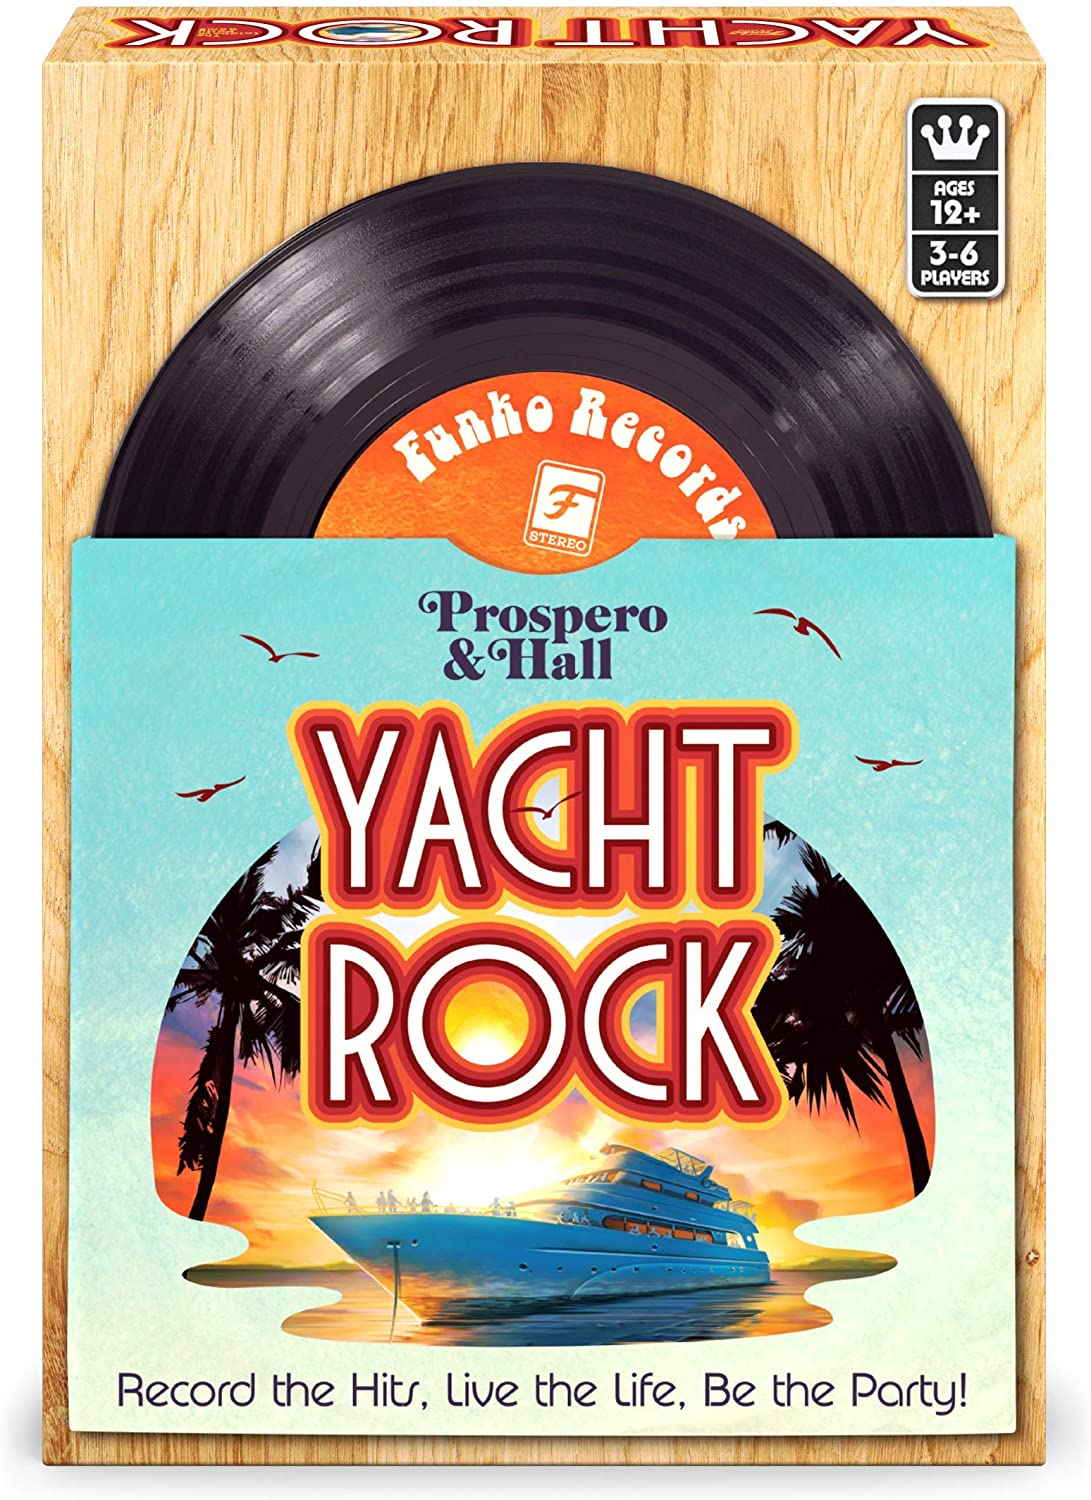 yacht rock party game box cover